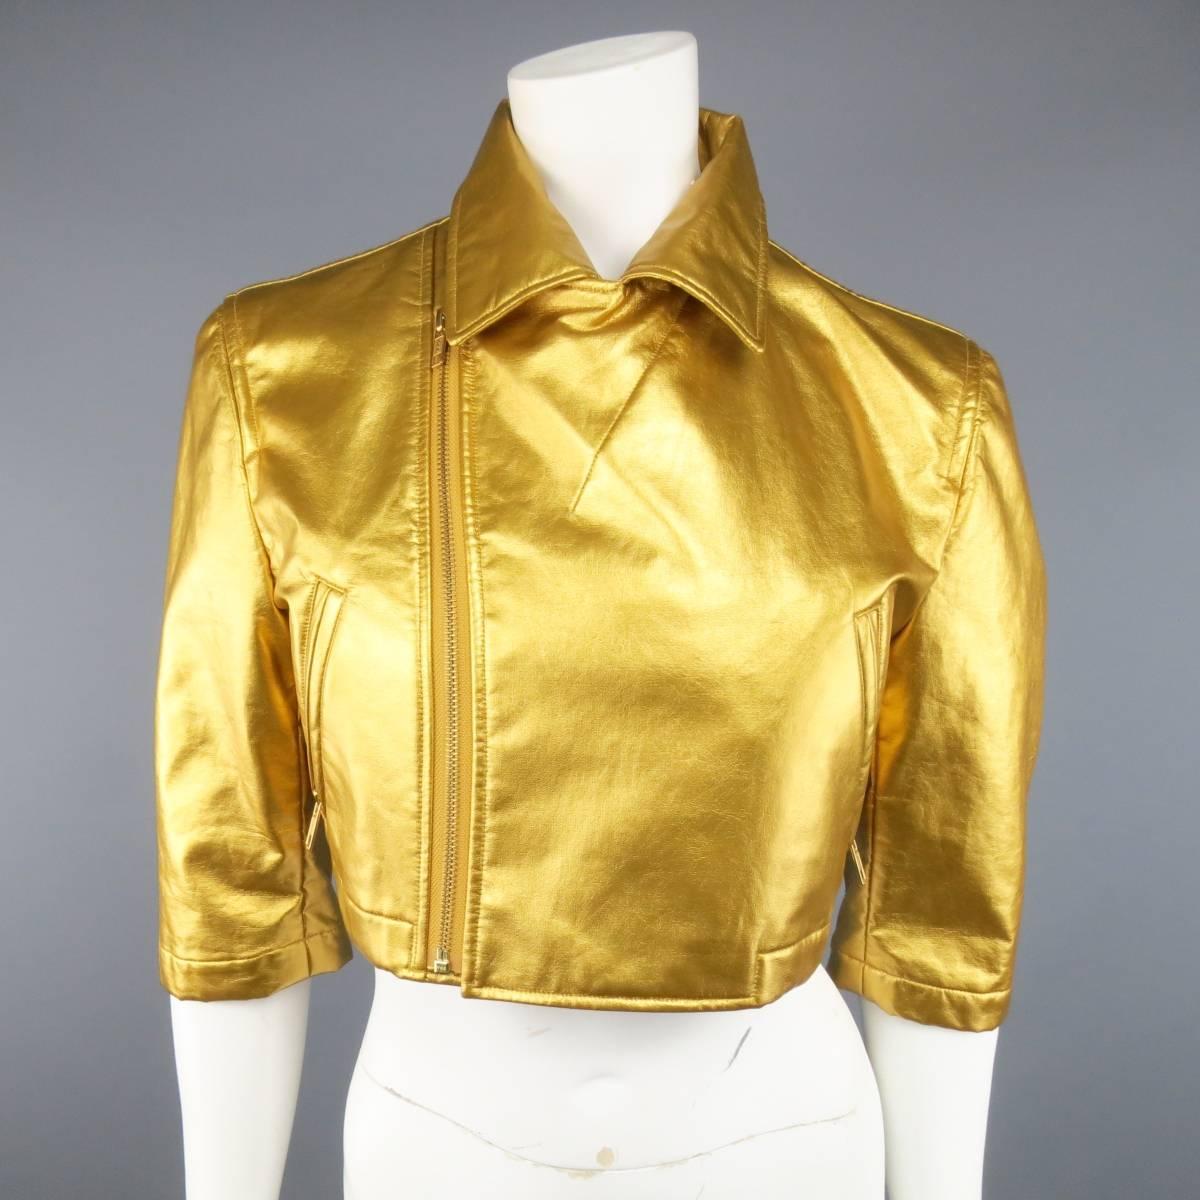 COMME DES GARCONS cropped biker style jacket in a metallic yellow gold vegan leather featuring a pointed collar with asymmetrical zip closure, slanted zip pockets, and three-quarter sleeves with zip opening. Tag Ripped and small imperfection on